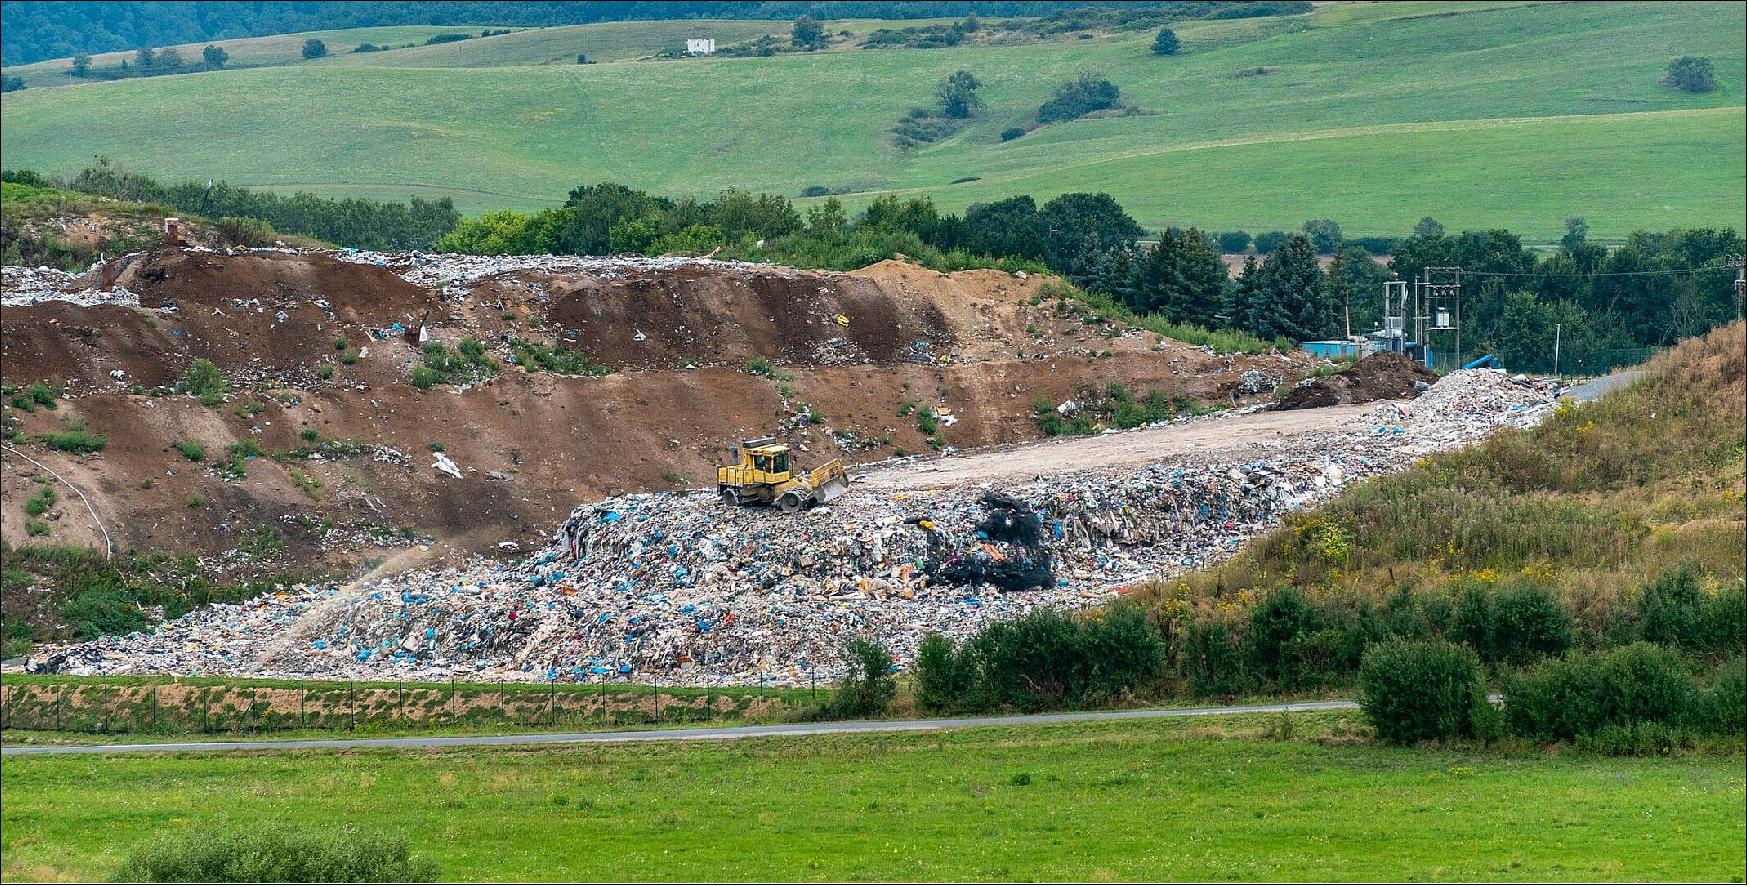 Figure 28: Photo of the Landfill site near Madrid, Spain (credit: Pixabay)